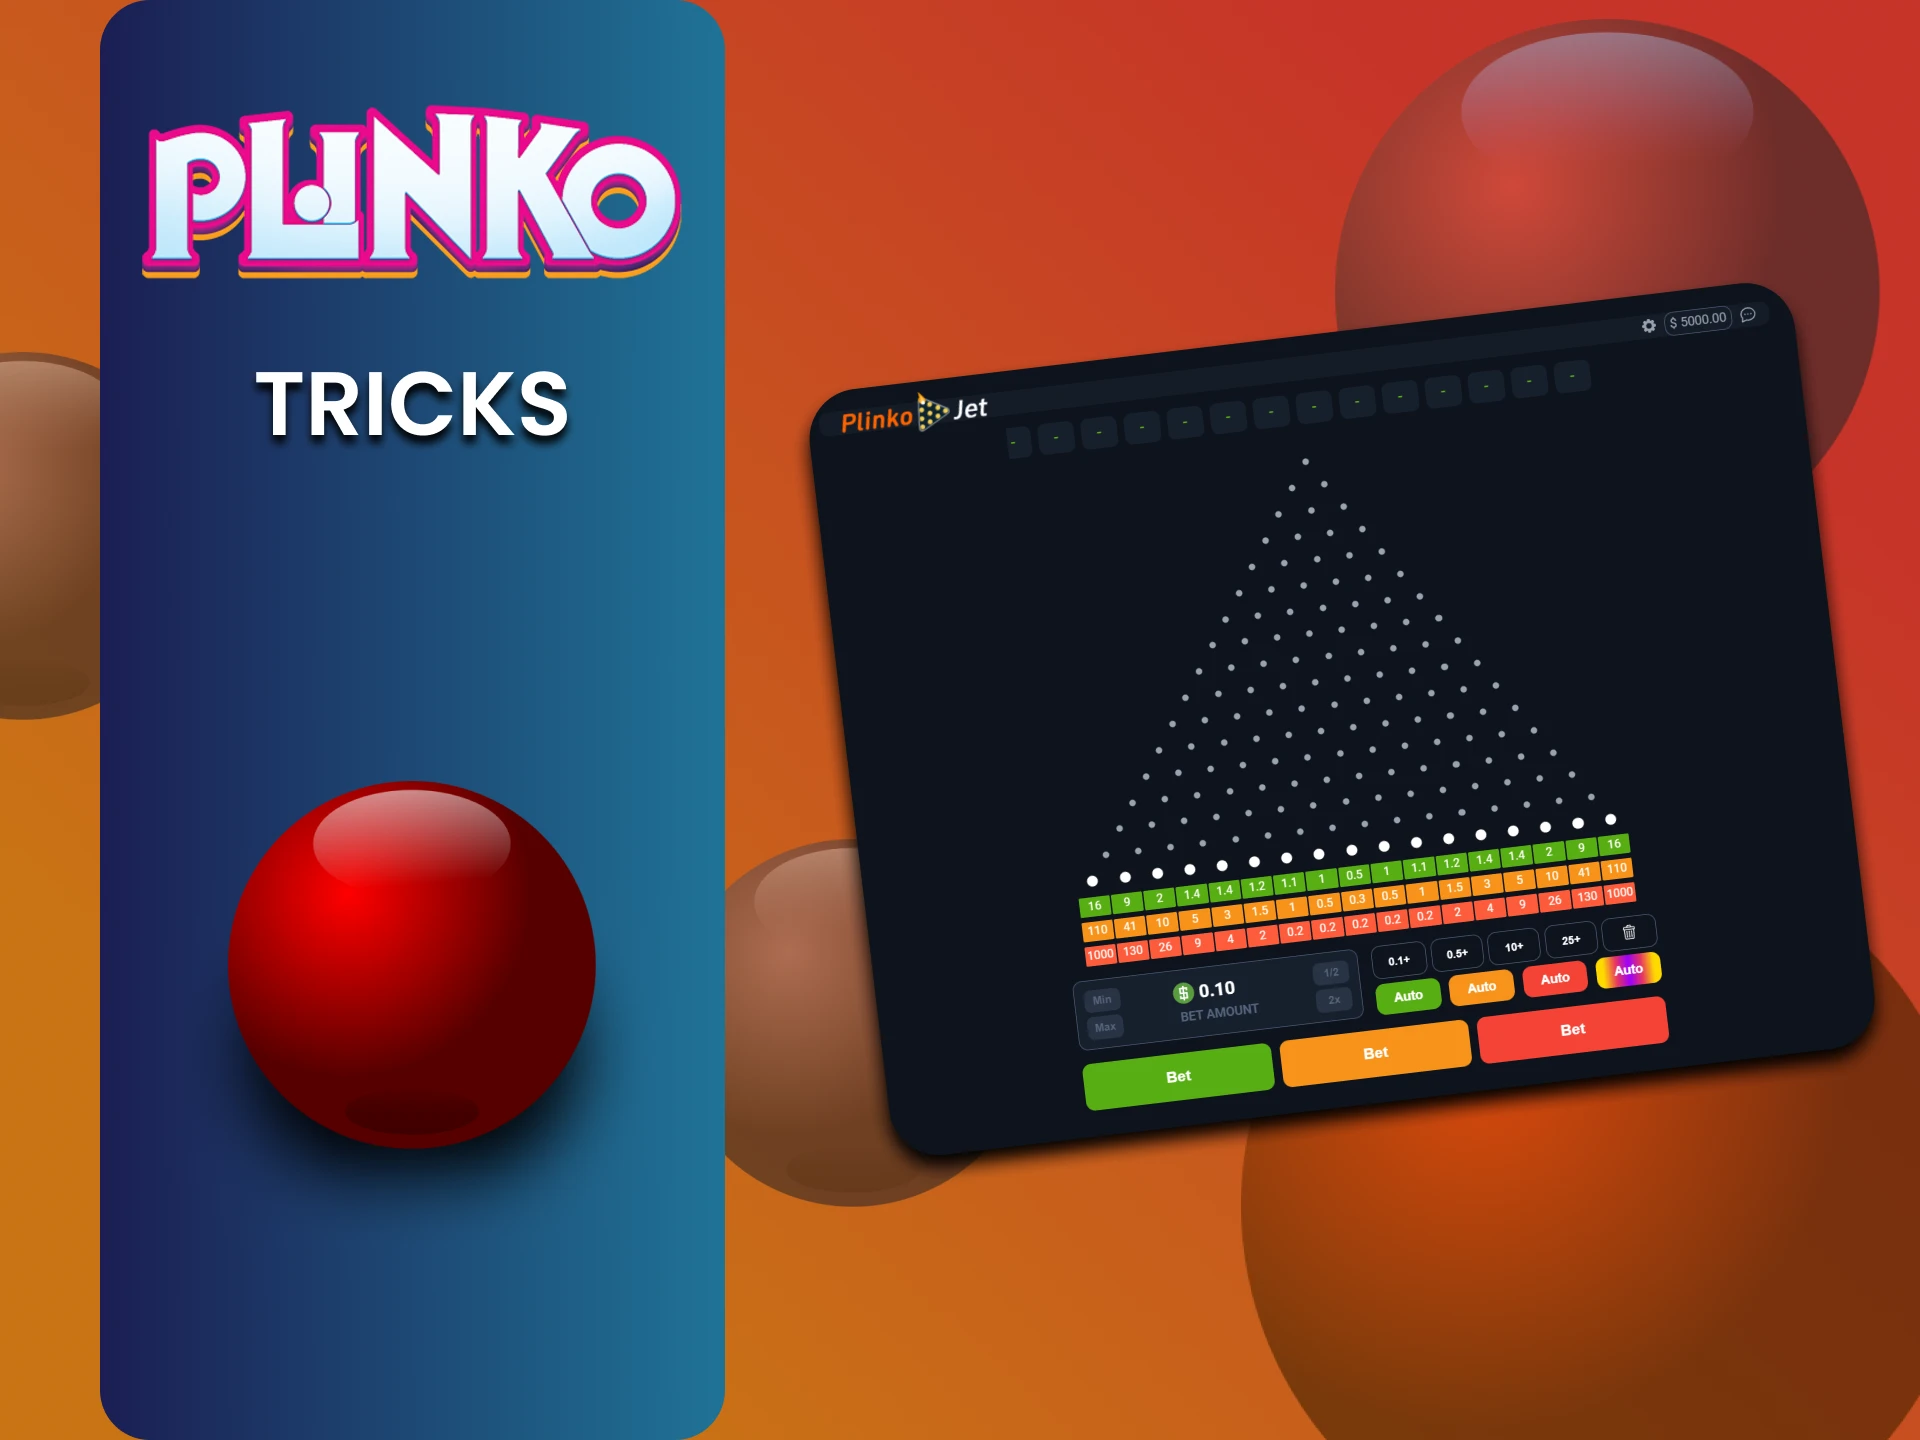 We will talk about tactics for winning in Plinko.